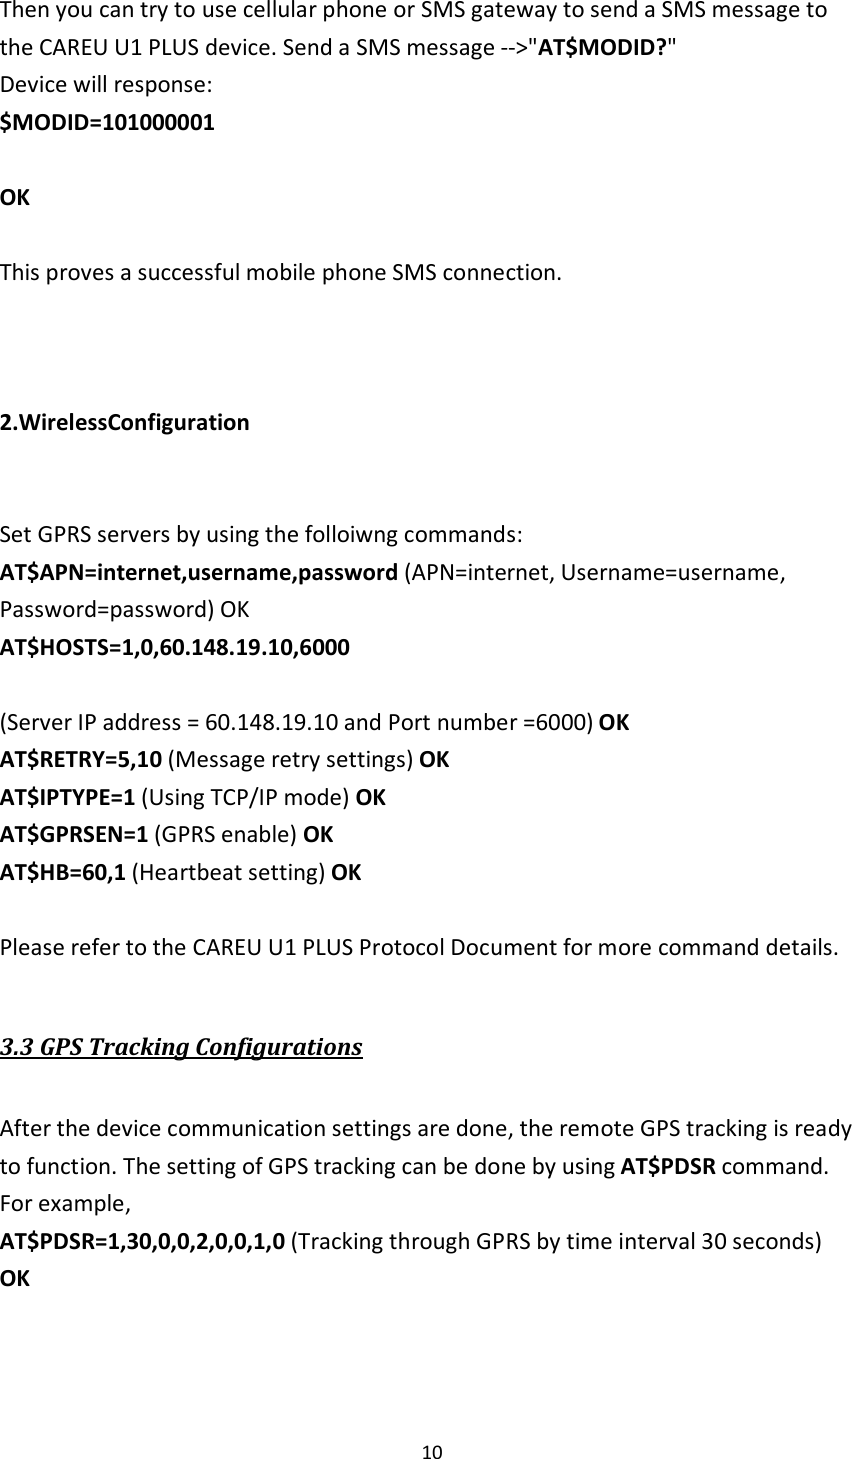  10  Then you can try to use cellular phone or SMS gateway to send a SMS message to the CAREU U1 PLUS device. Send a SMS message --&gt;&quot;AT$MODID?&quot; Device will response: $MODID=101000001  OK  This proves a successful mobile phone SMS connection.    2.WirelessConfiguration   Set GPRS servers by using the folloiwng commands: AT$APN=internet,username,password (APN=internet, Username=username, Password=password) OK AT$HOSTS=1,0,60.148.19.10,6000  (Server IP address = 60.148.19.10 and Port number =6000) OK AT$RETRY=5,10 (Message retry settings) OK AT$IPTYPE=1 (Using TCP/IP mode) OK AT$GPRSEN=1 (GPRS enable) OK AT$HB=60,1 (Heartbeat setting) OK  Please refer to the CAREU U1 PLUS Protocol Document for more command details.  3.3 GPS Tracking Configurations  After the device communication settings are done, the remote GPS tracking is ready to function. The setting of GPS tracking can be done by using AT$PDSR command. For example, AT$PDSR=1,30,0,0,2,0,0,1,0 (Tracking through GPRS by time interval 30 seconds) OK   